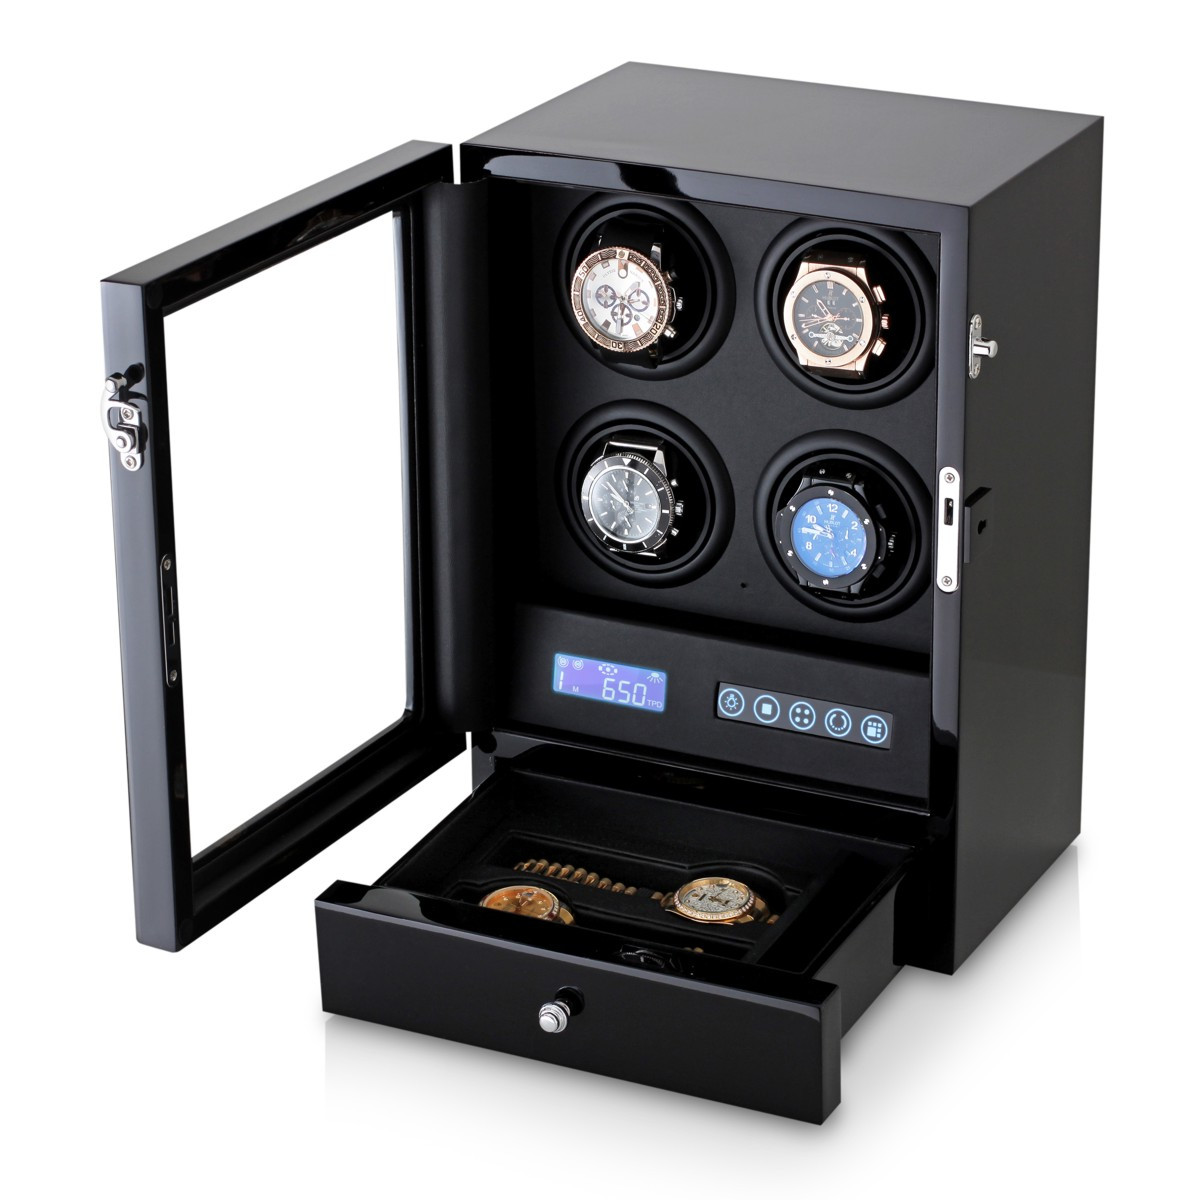 4 Watch Winder S204LB with Storage Drawer and Interior Light